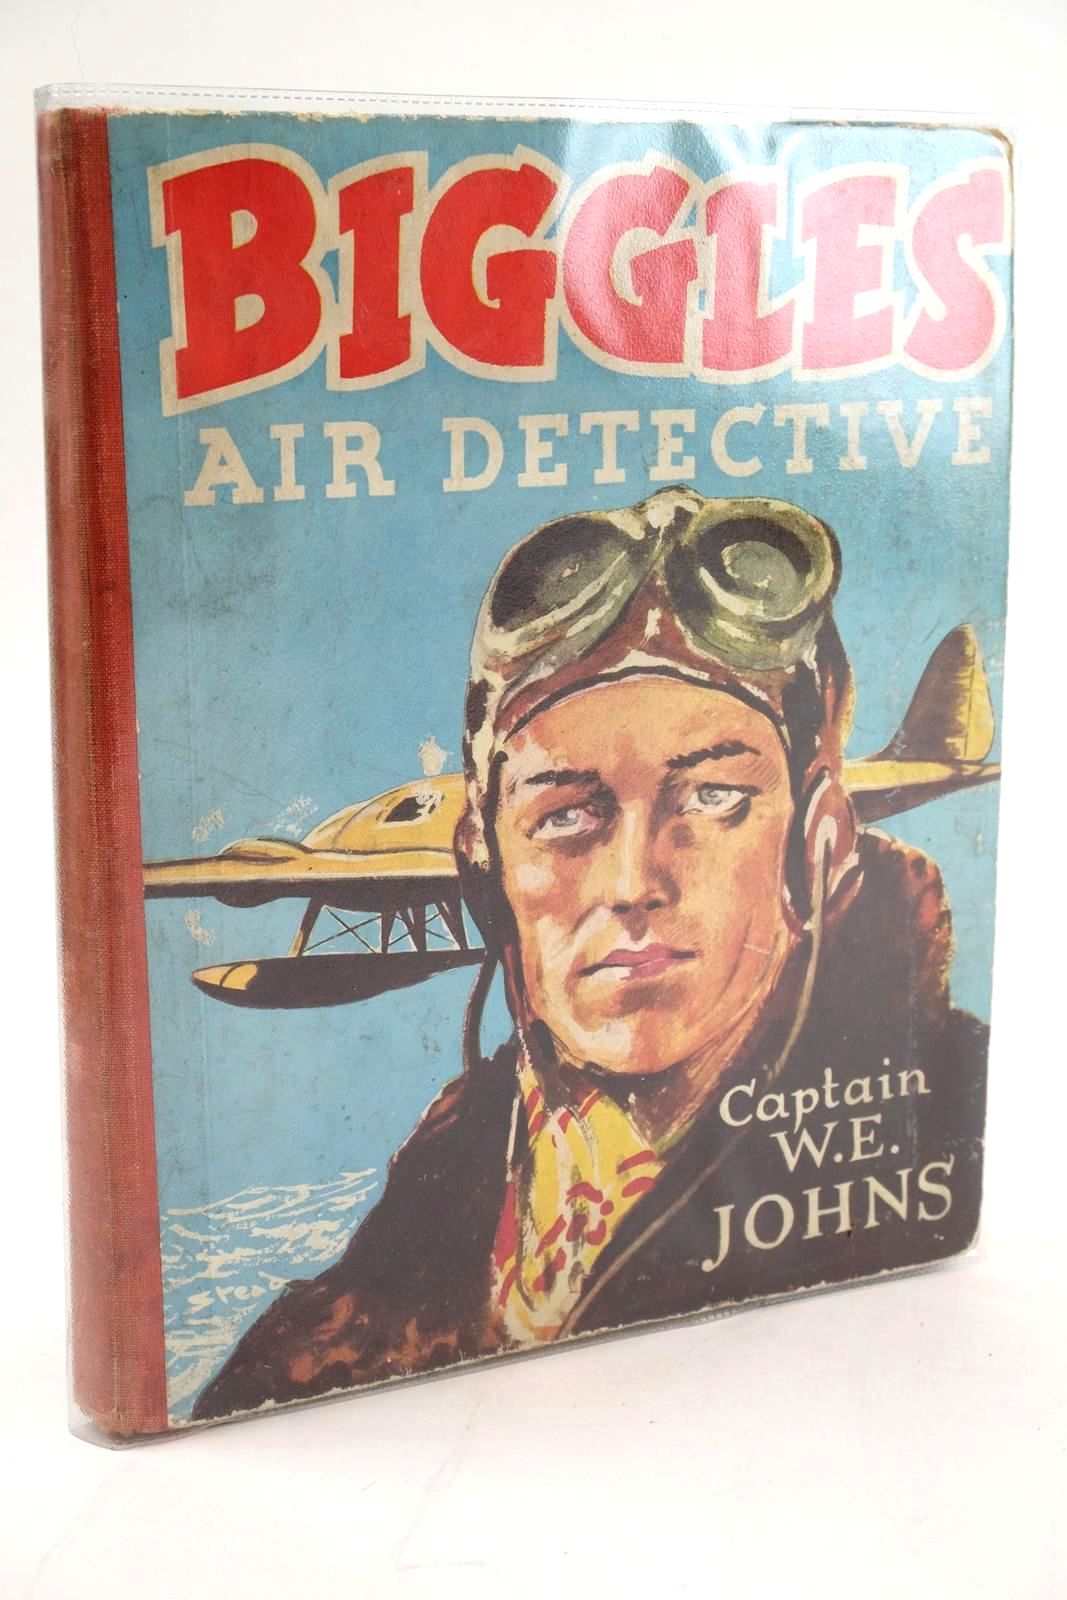 Photo of BIGGLES-AIR DETECTIVE written by Johns, W.E. illustrated by Stead, Leslie published by Marks & Spencer (STOCK CODE: 1324367)  for sale by Stella & Rose's Books